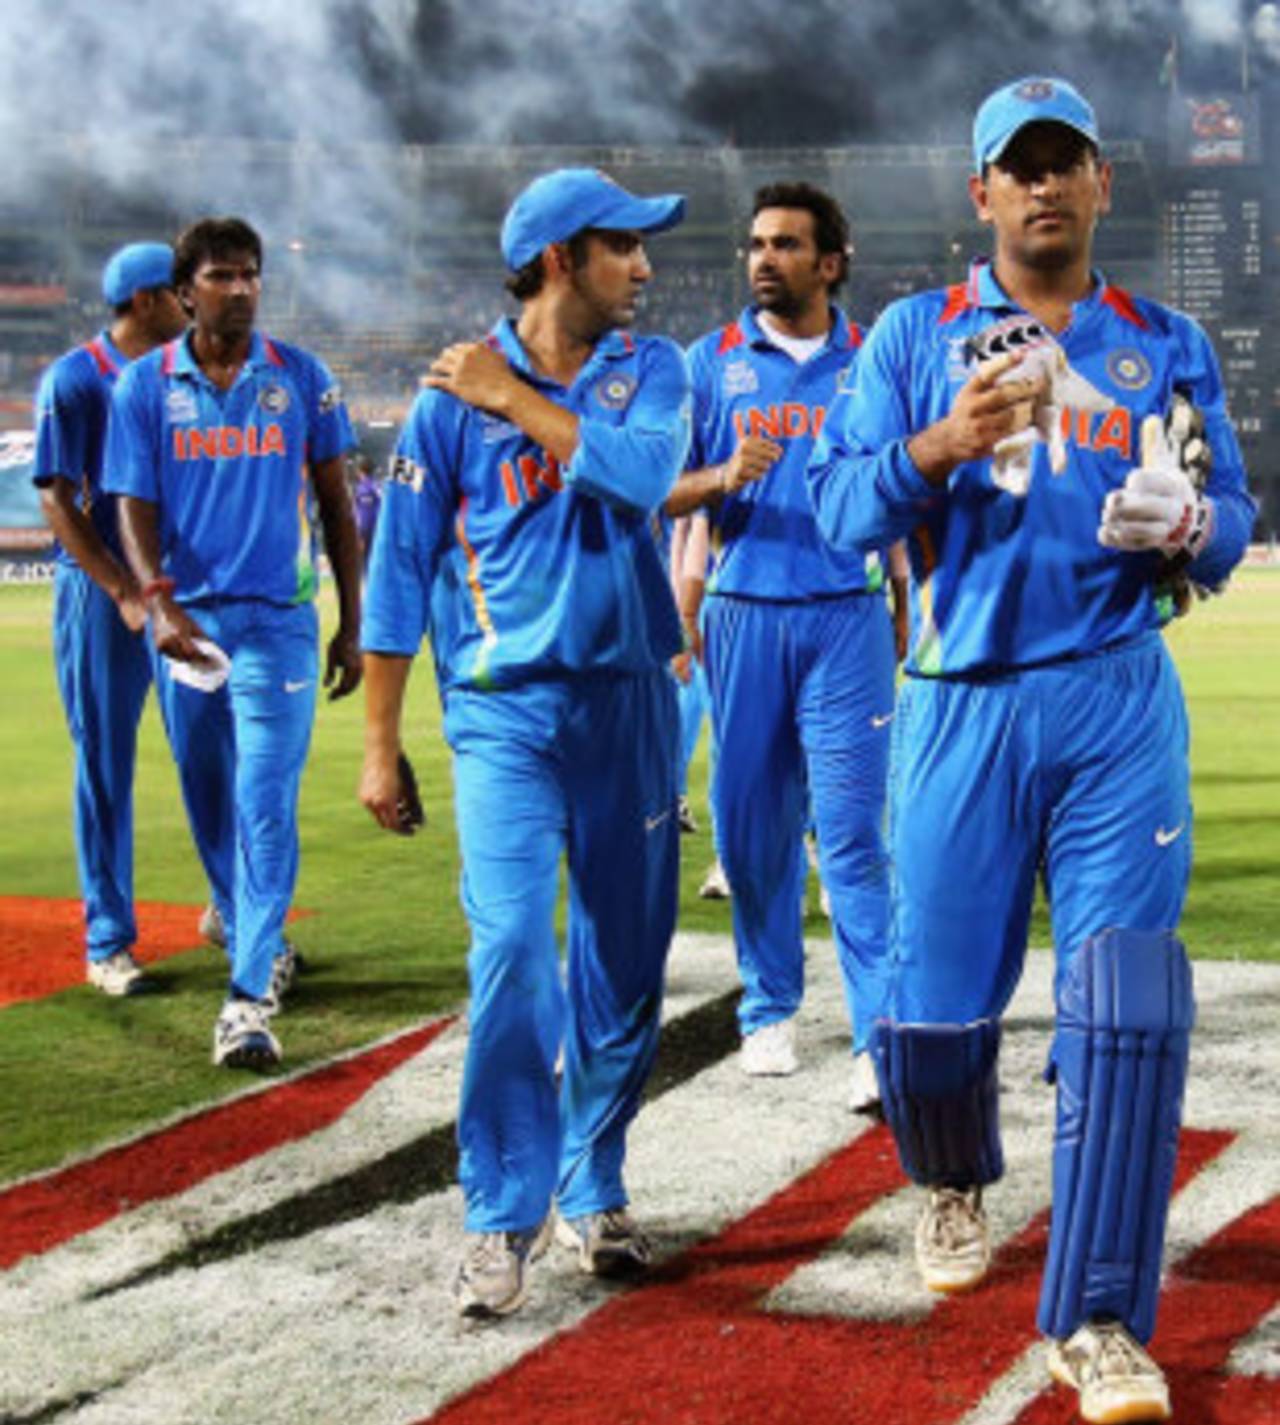 MS Dhoni leads his side from the field having won the game but been knocked out, India v South Africa, Super Eights, World Twenty20, Colombo, October 2, 2012